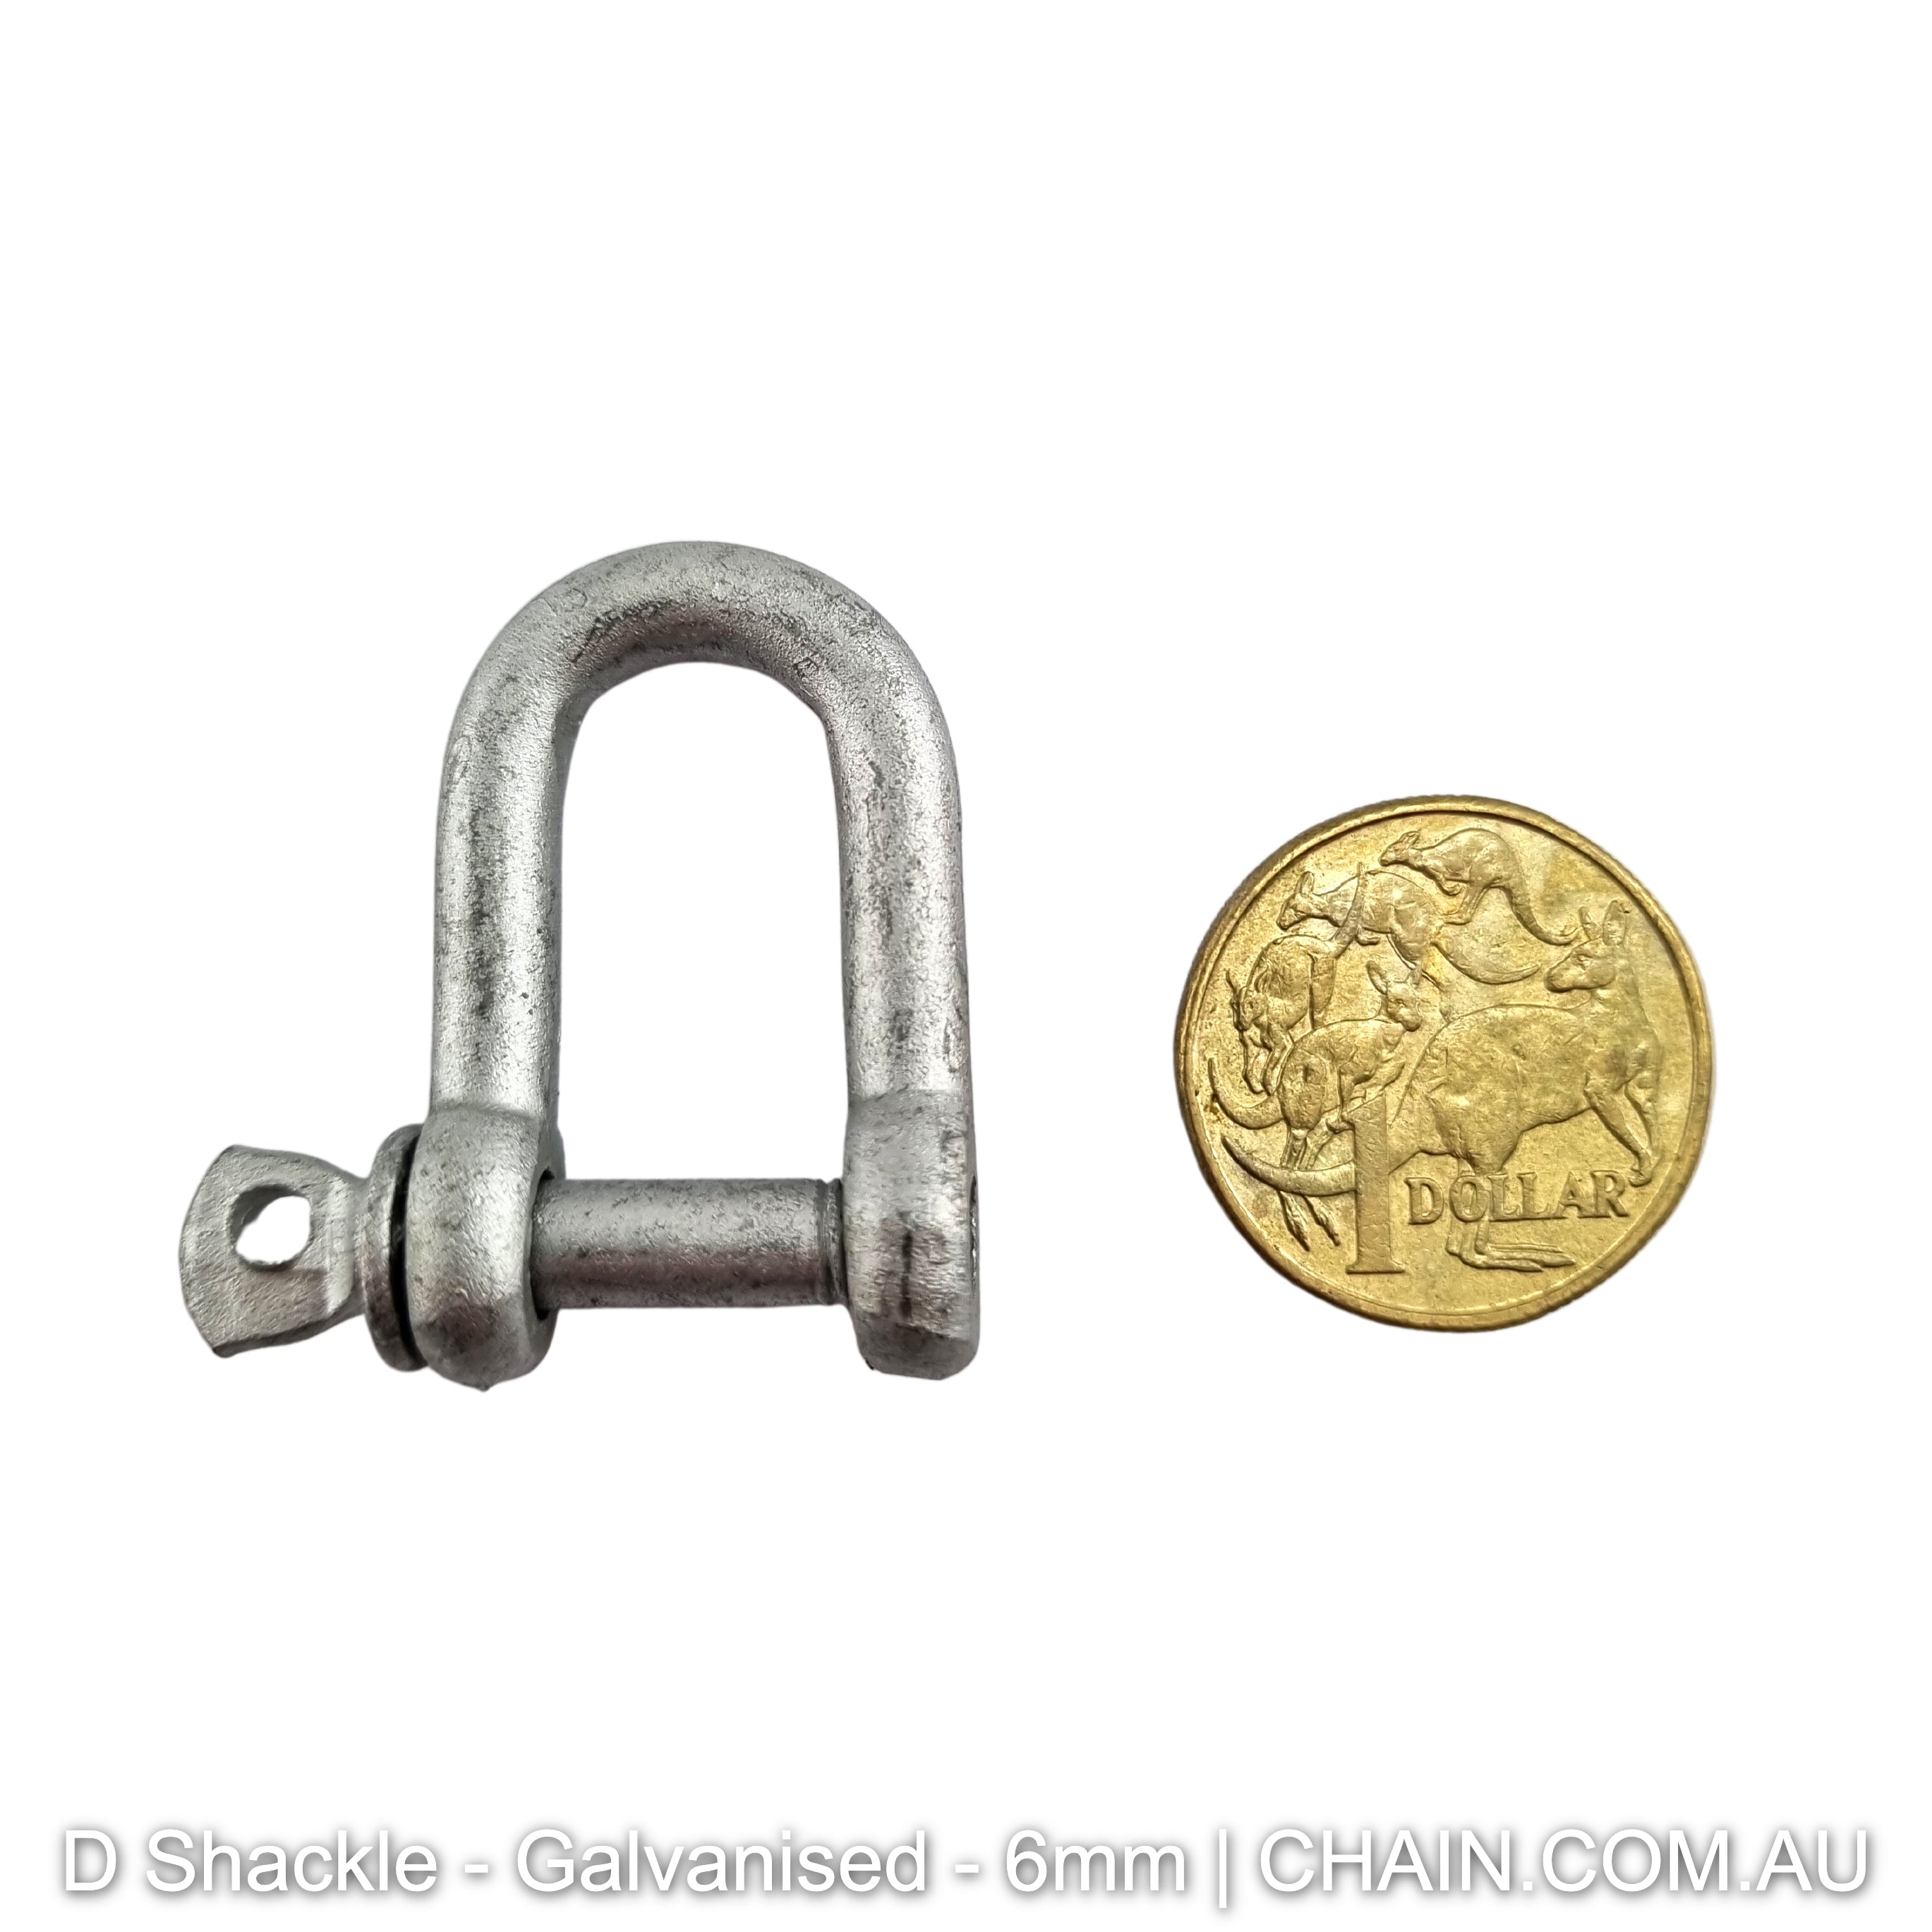 6mm Galvanised D Shackle. Shop D-Shackles and Hardware online at factory direct prices. Shipping Australia wide or Melbourne pick-up